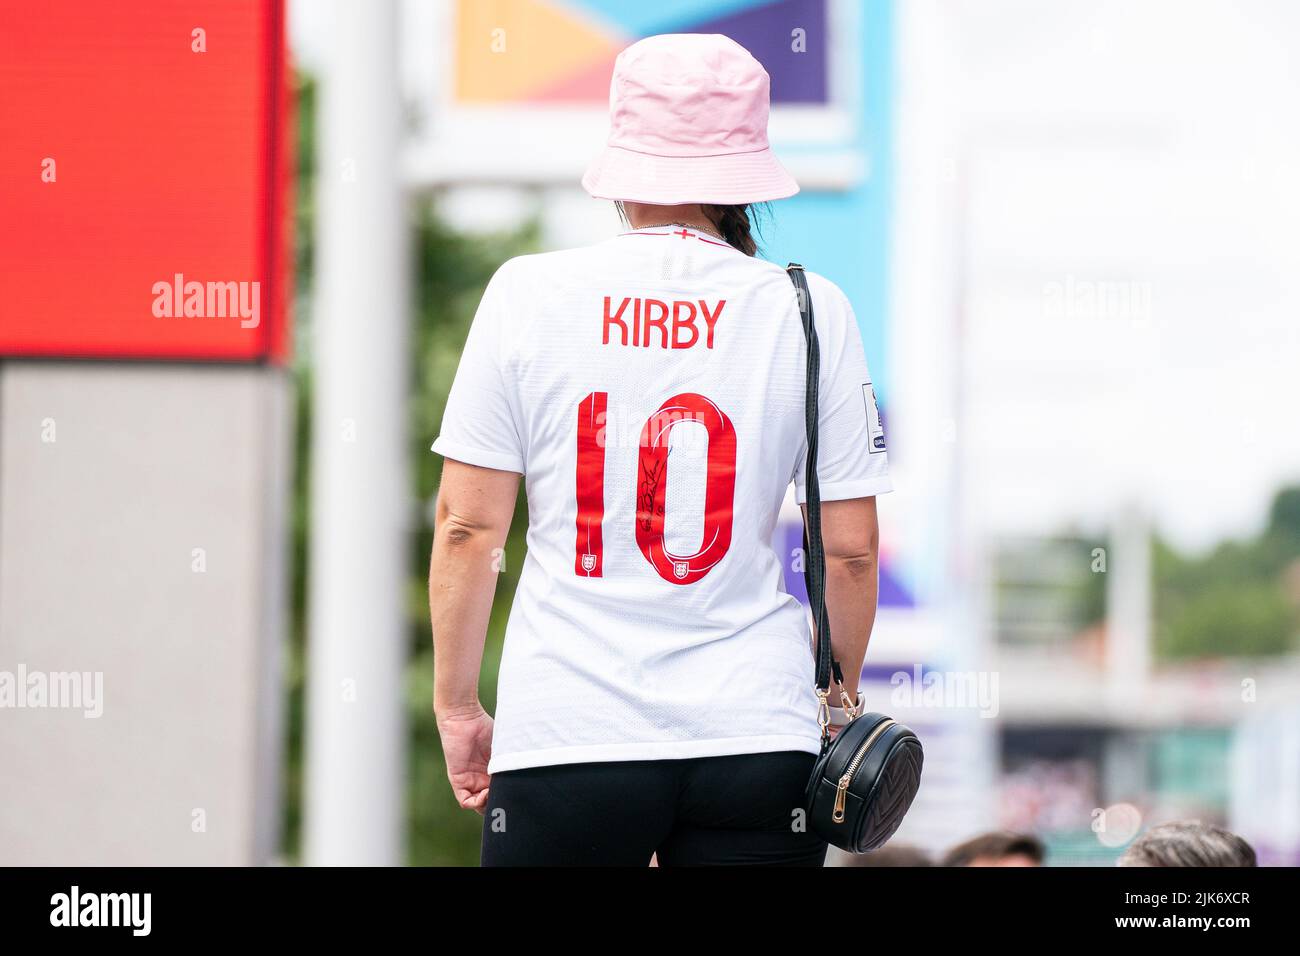 London, UK. 31st July, 2022. England fan on Wembley Way during the UEFA Womens Euro 2022 Final match between England and Germany at the Wembley Stadium in London, England. (Foto: Sam Mallia/Sports Press Photo/C - ONE HOUR DEADLINE - ONLY ACTIVATE FTP IF IMAGES LESS THAN ONE HOUR OLD - Alamy) Credit: SPP Sport Press Photo. /Alamy Live News Stock Photo